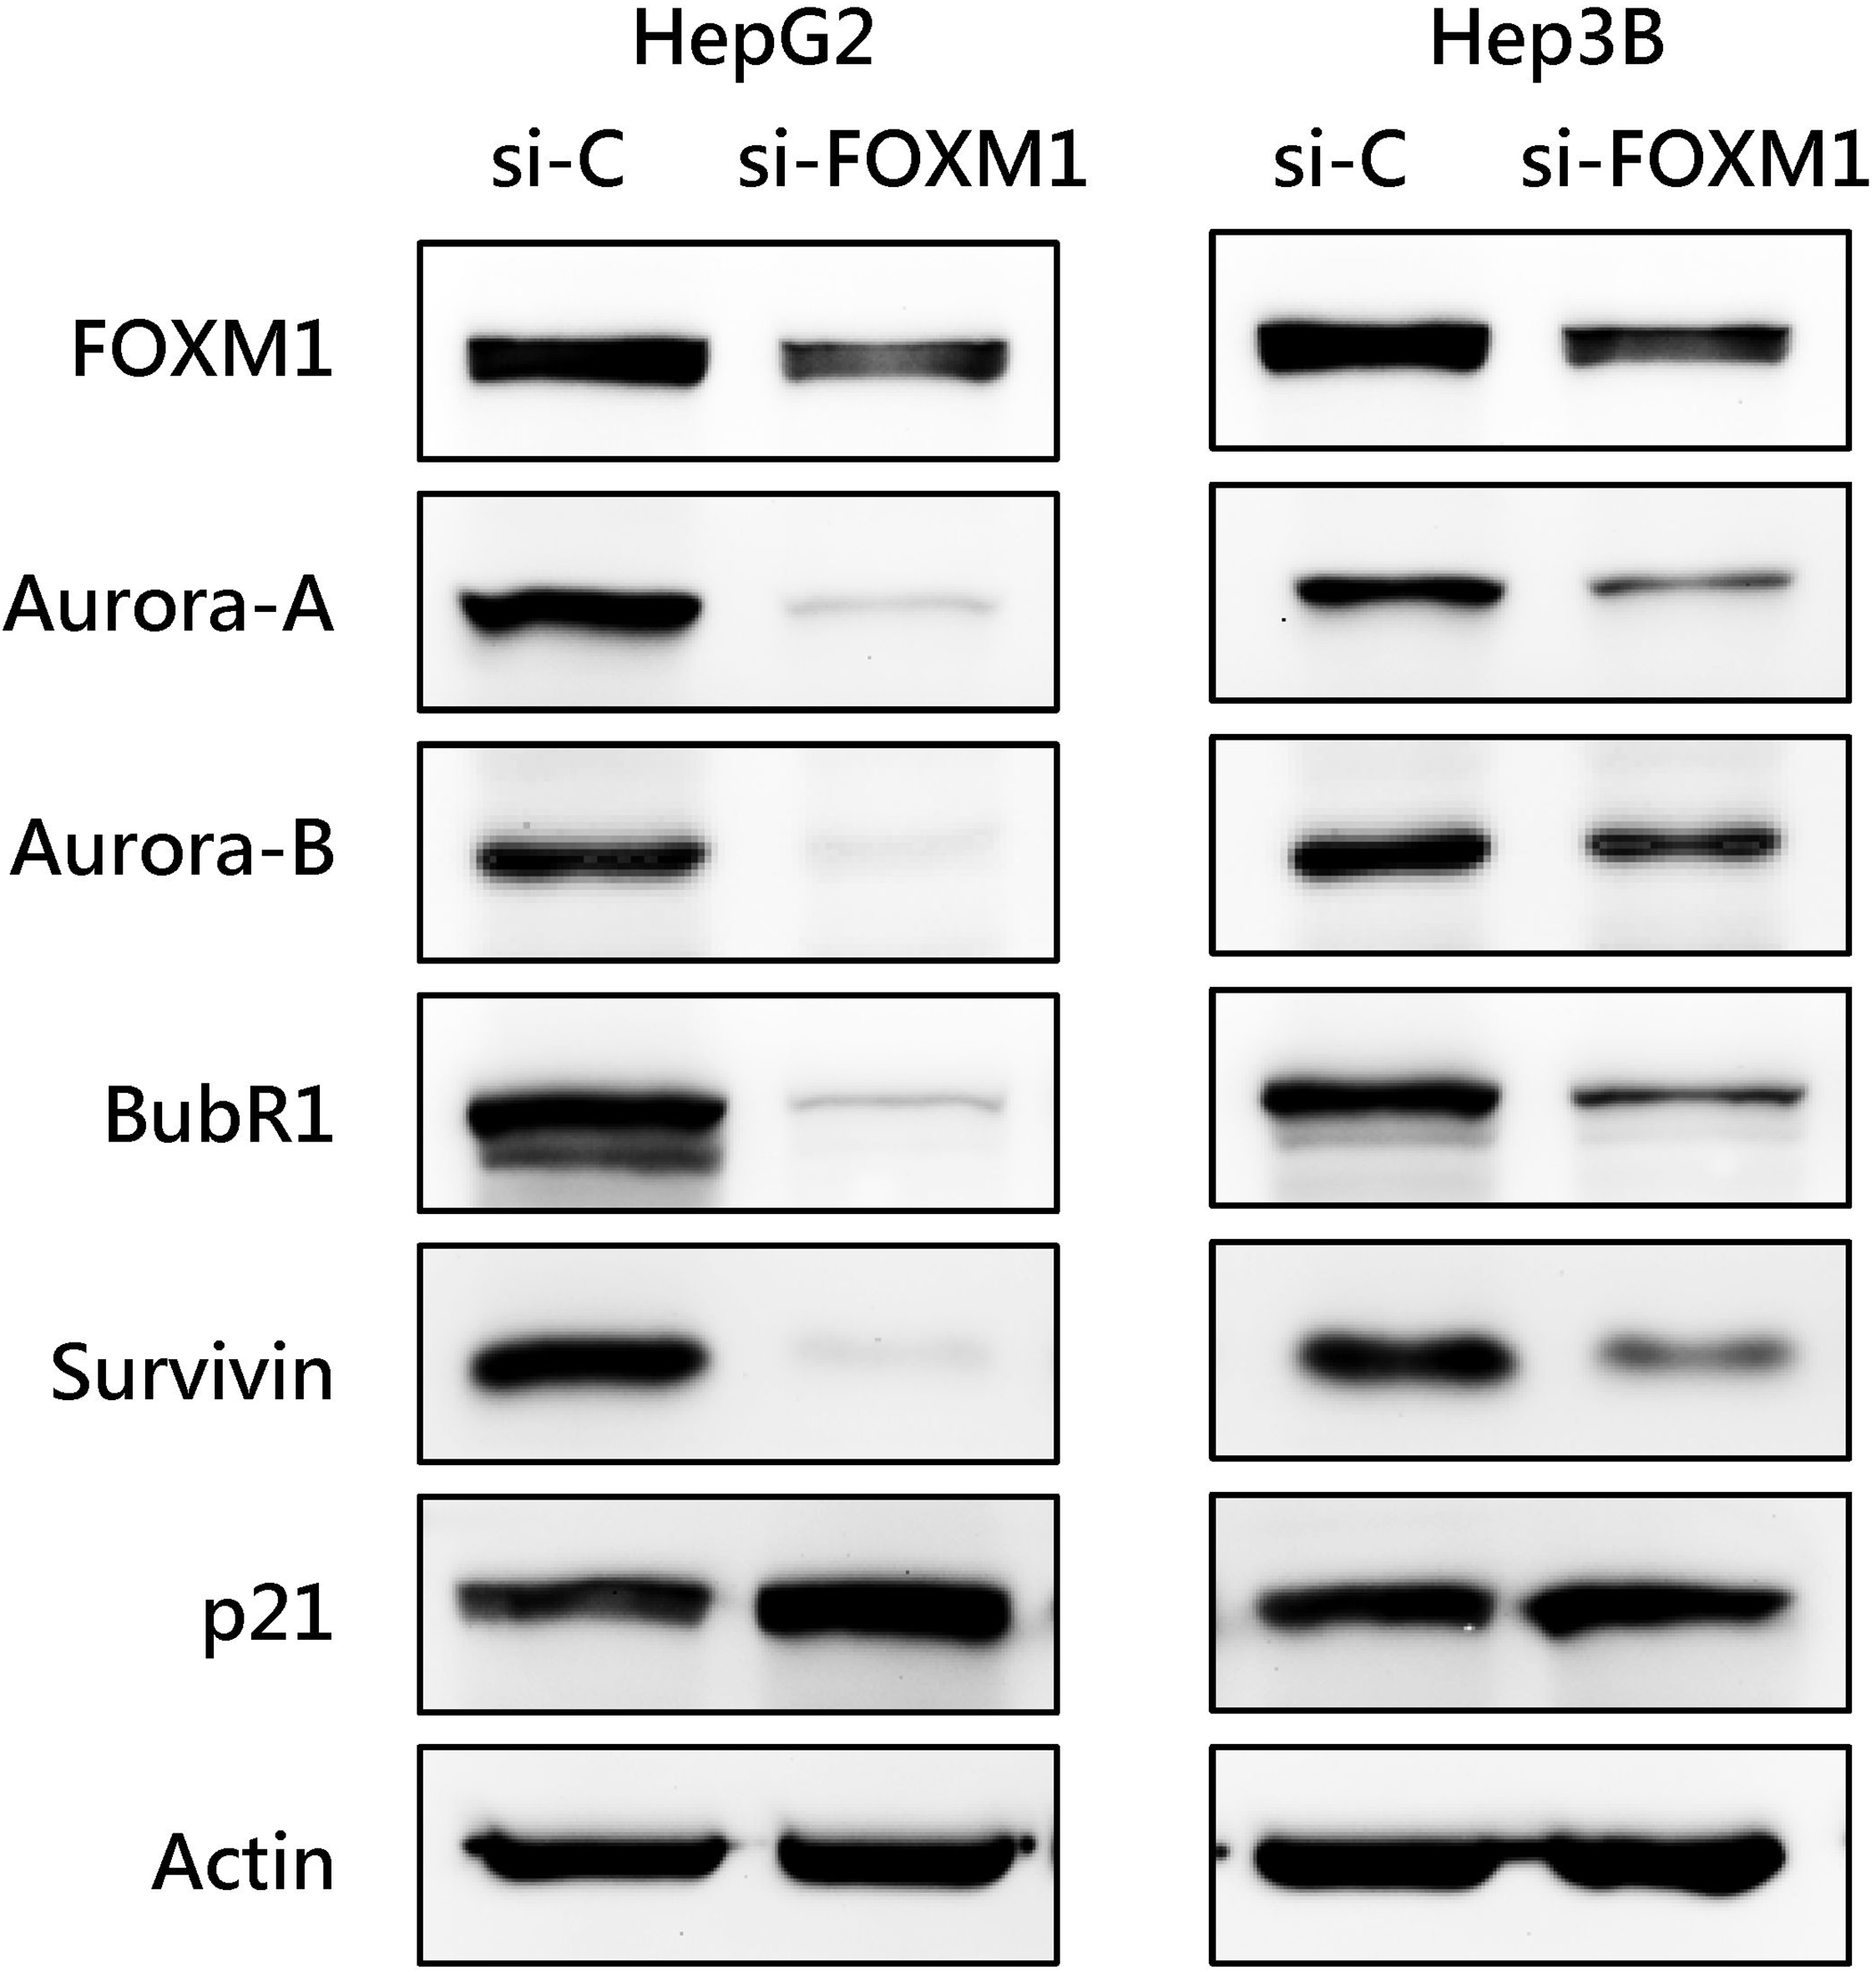 Effect of FOXM1 knockdown on the expression of cell cycle-regulating proteins in HCC cells. HepG2 and Hep3B cells were transfected with control siRNA or with FOXM1 siRNA. The expression of the indicated cell cycle-regulating proteins was analyzed by western blotting.